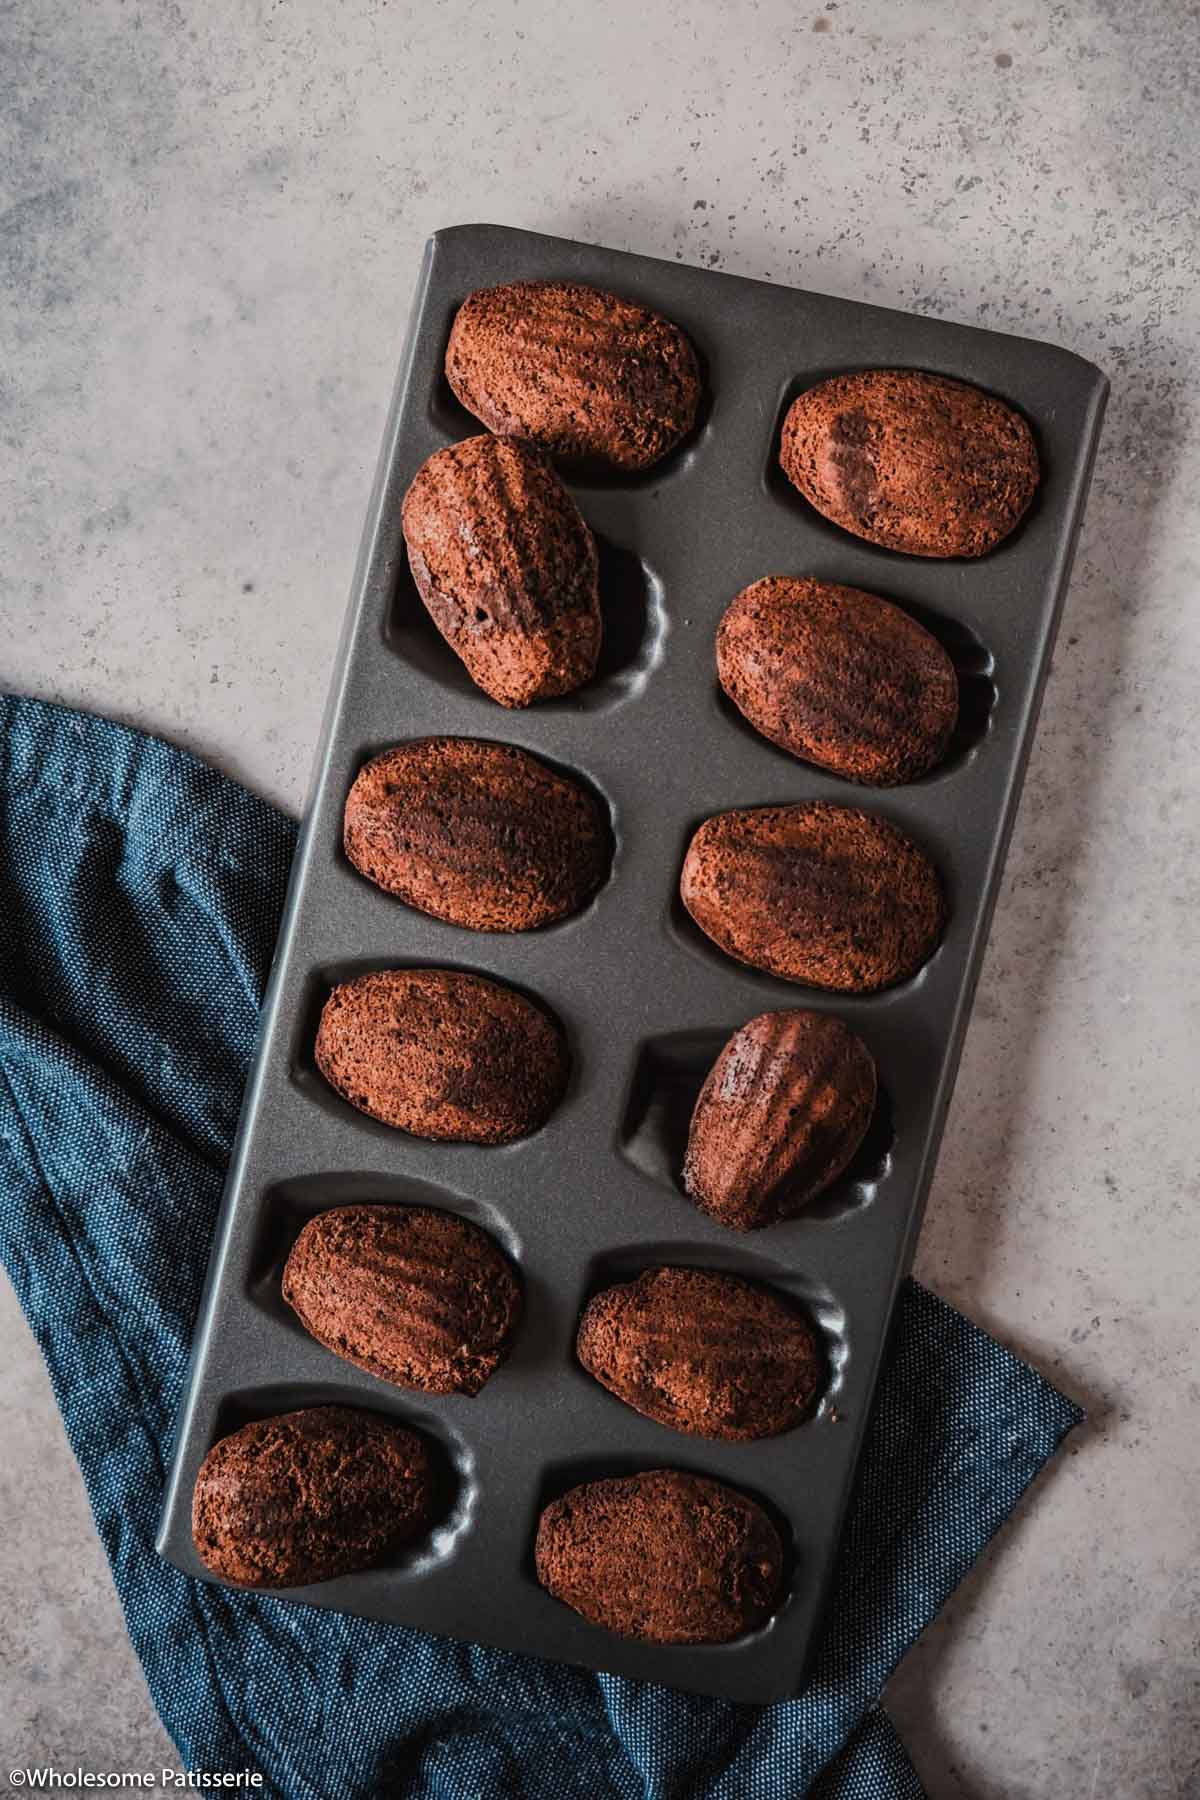 Baked madeleines displayed in the pan